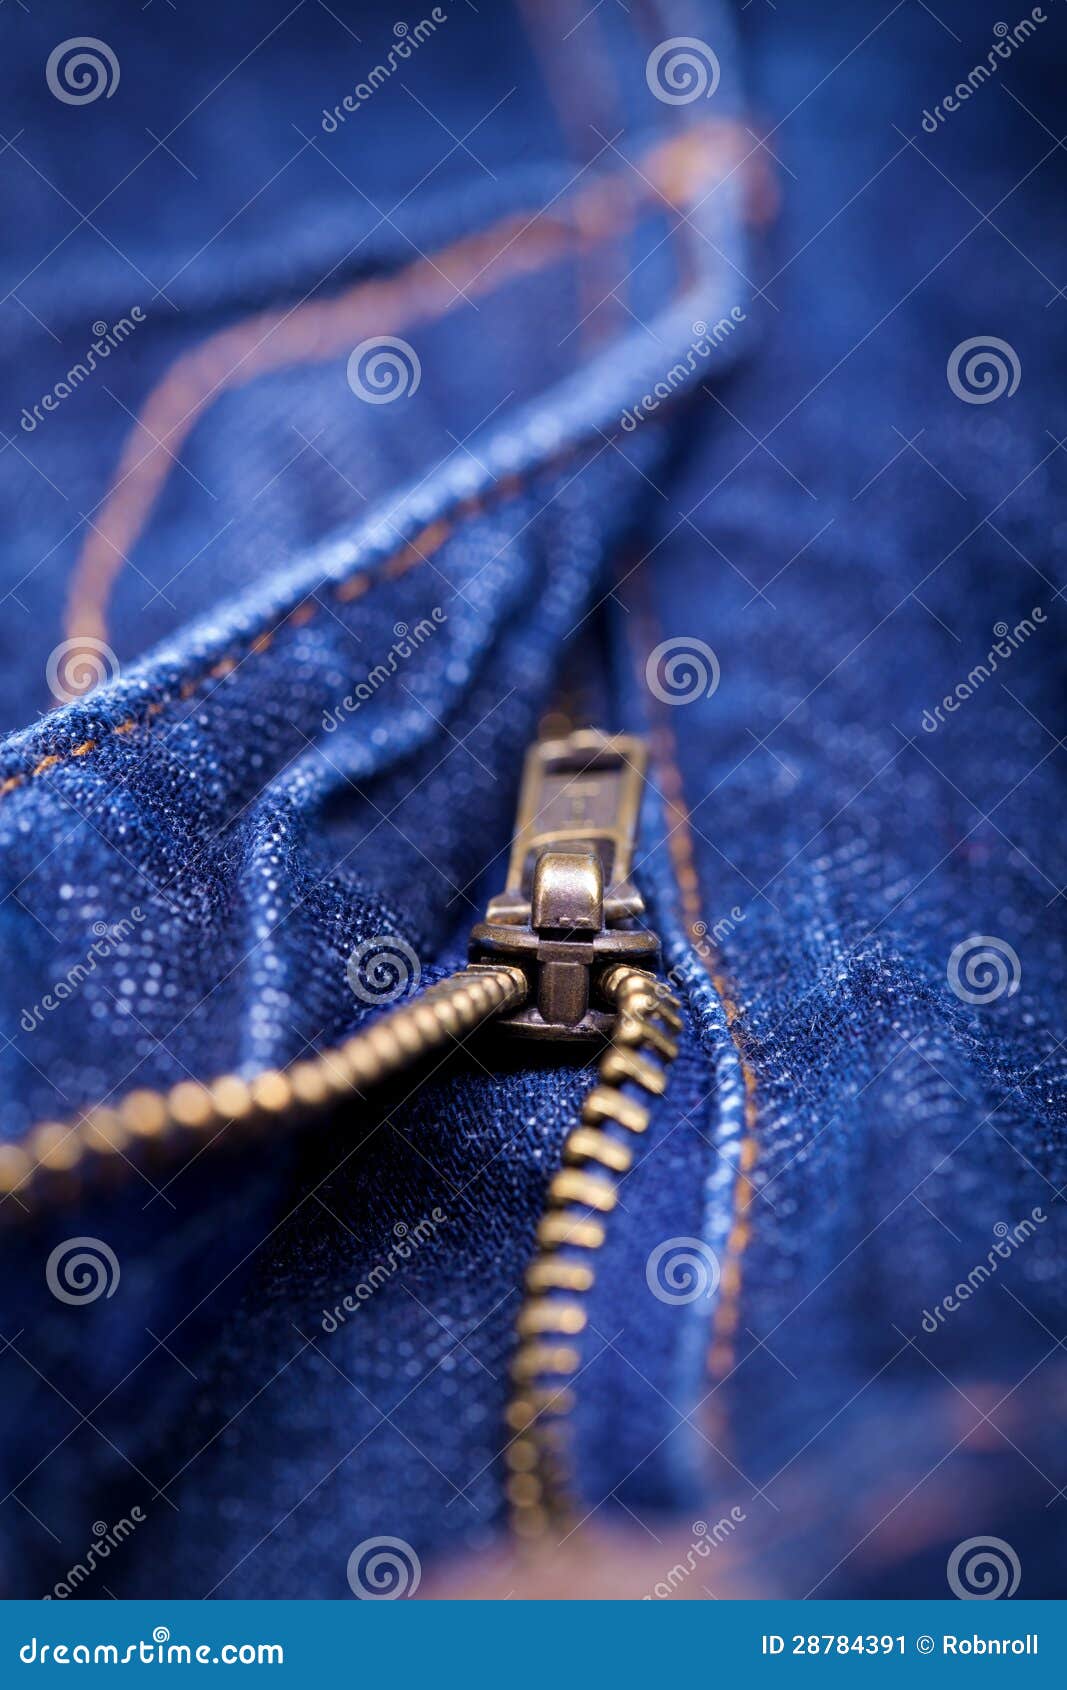 Macro Detail of a Blue Jeans Zipper Stock Image - Image of fabric ...